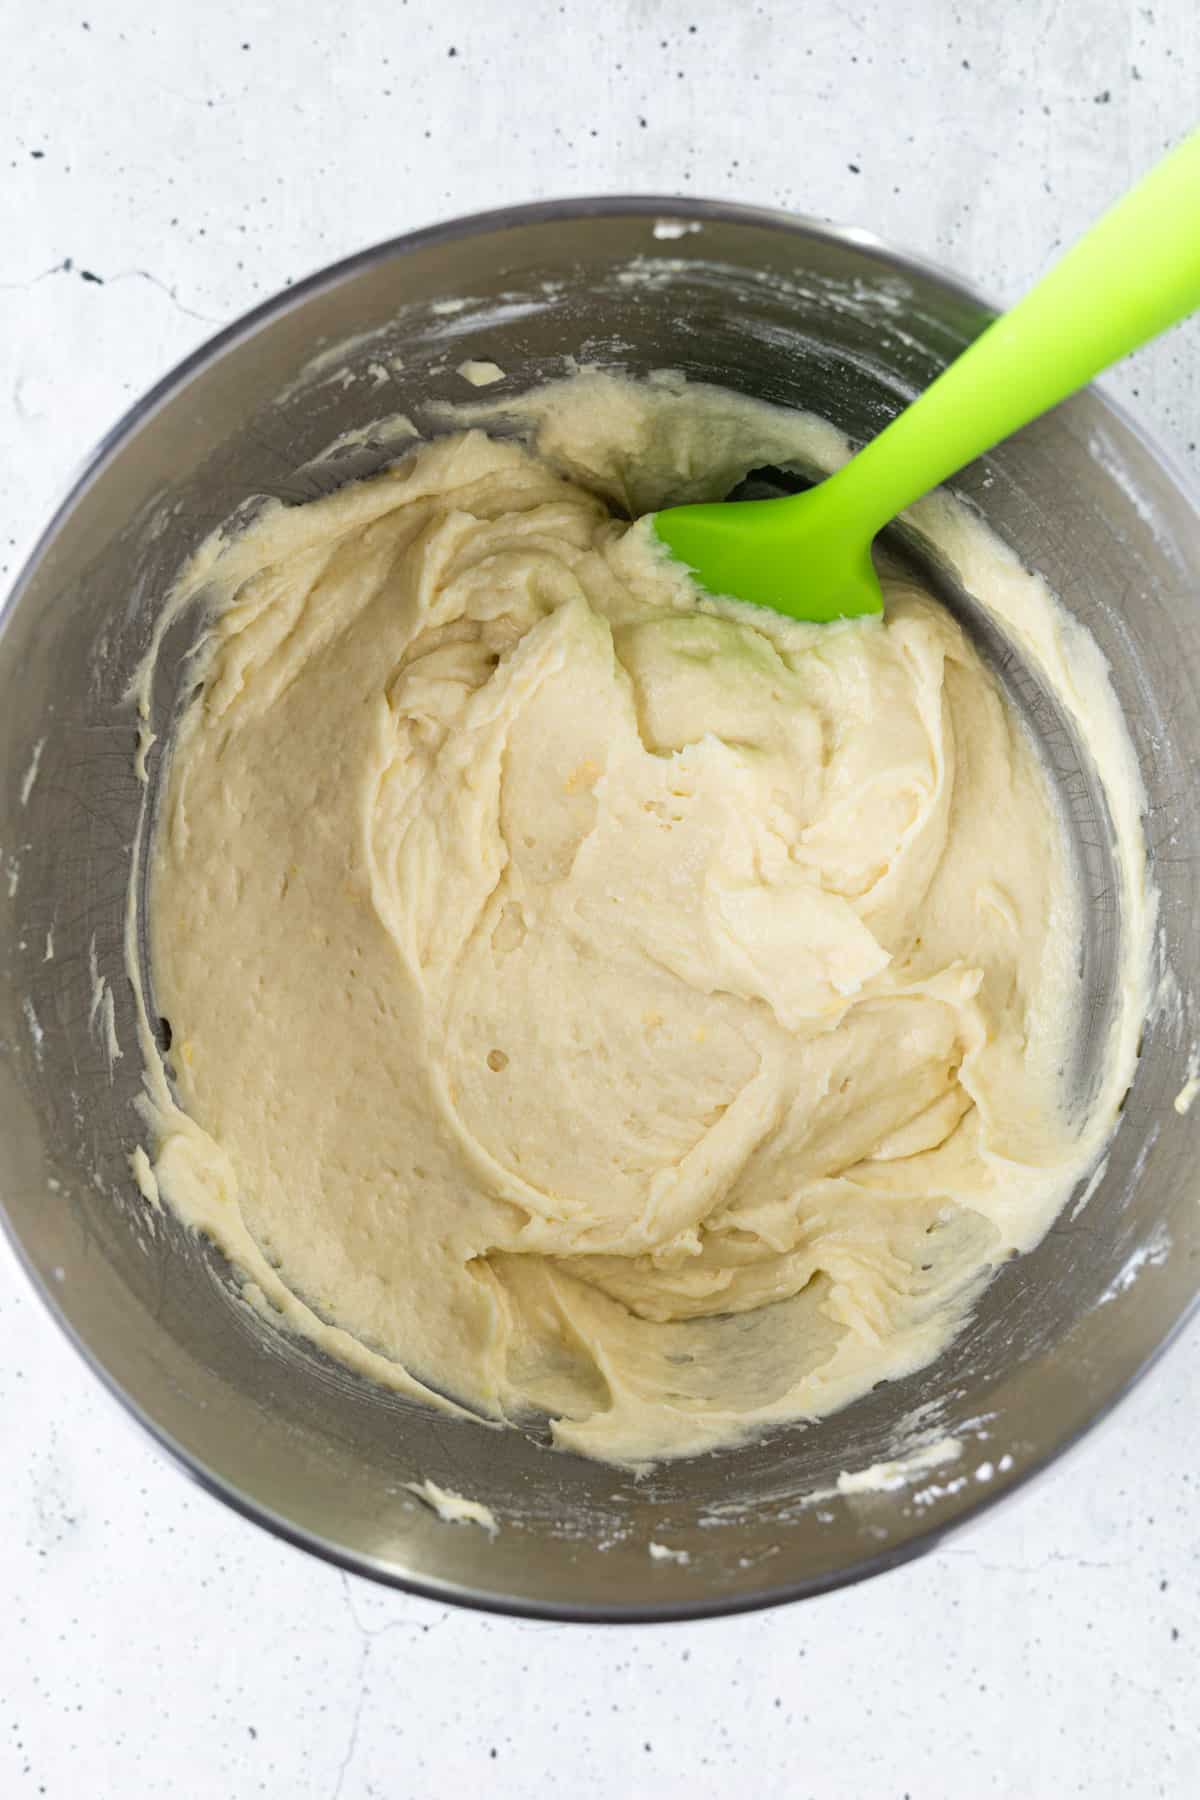 A bowl of cake batter with a rubber spatula.